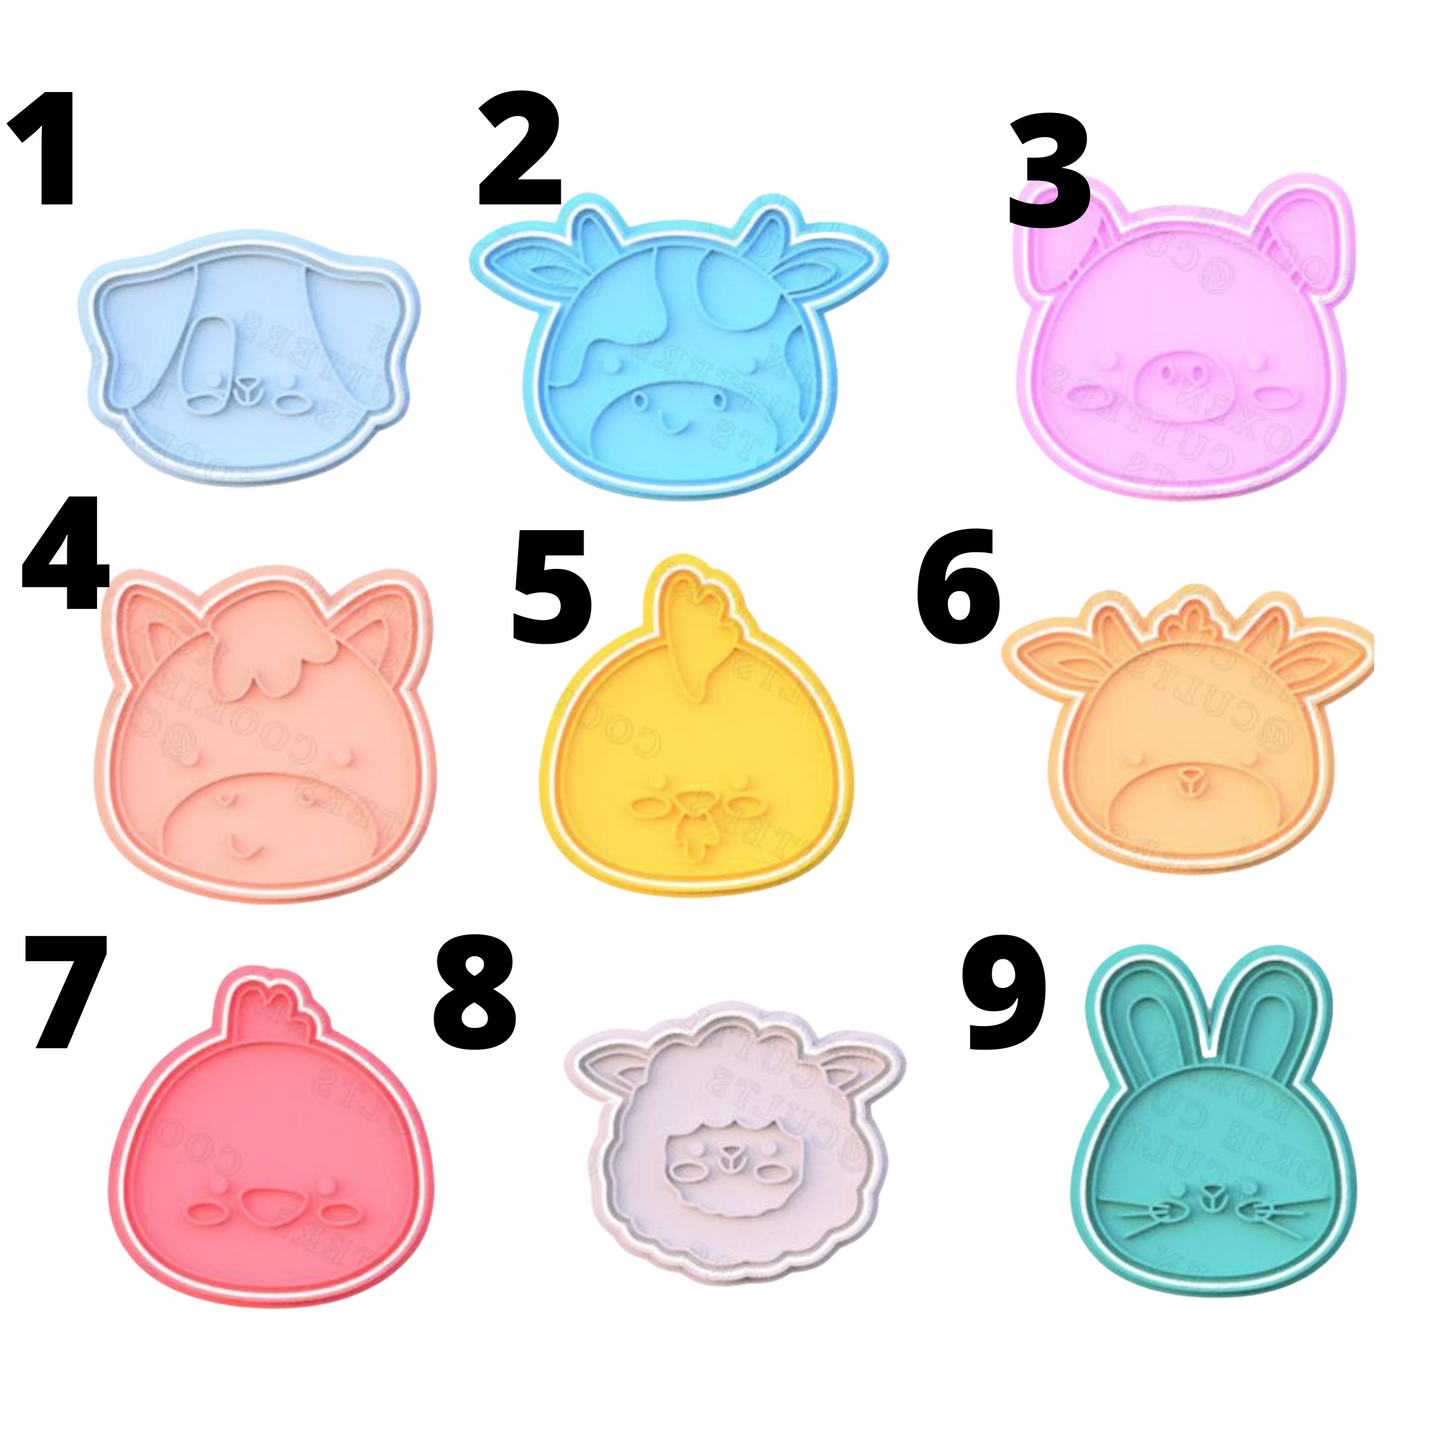 Animal Faces Cookie Cutters